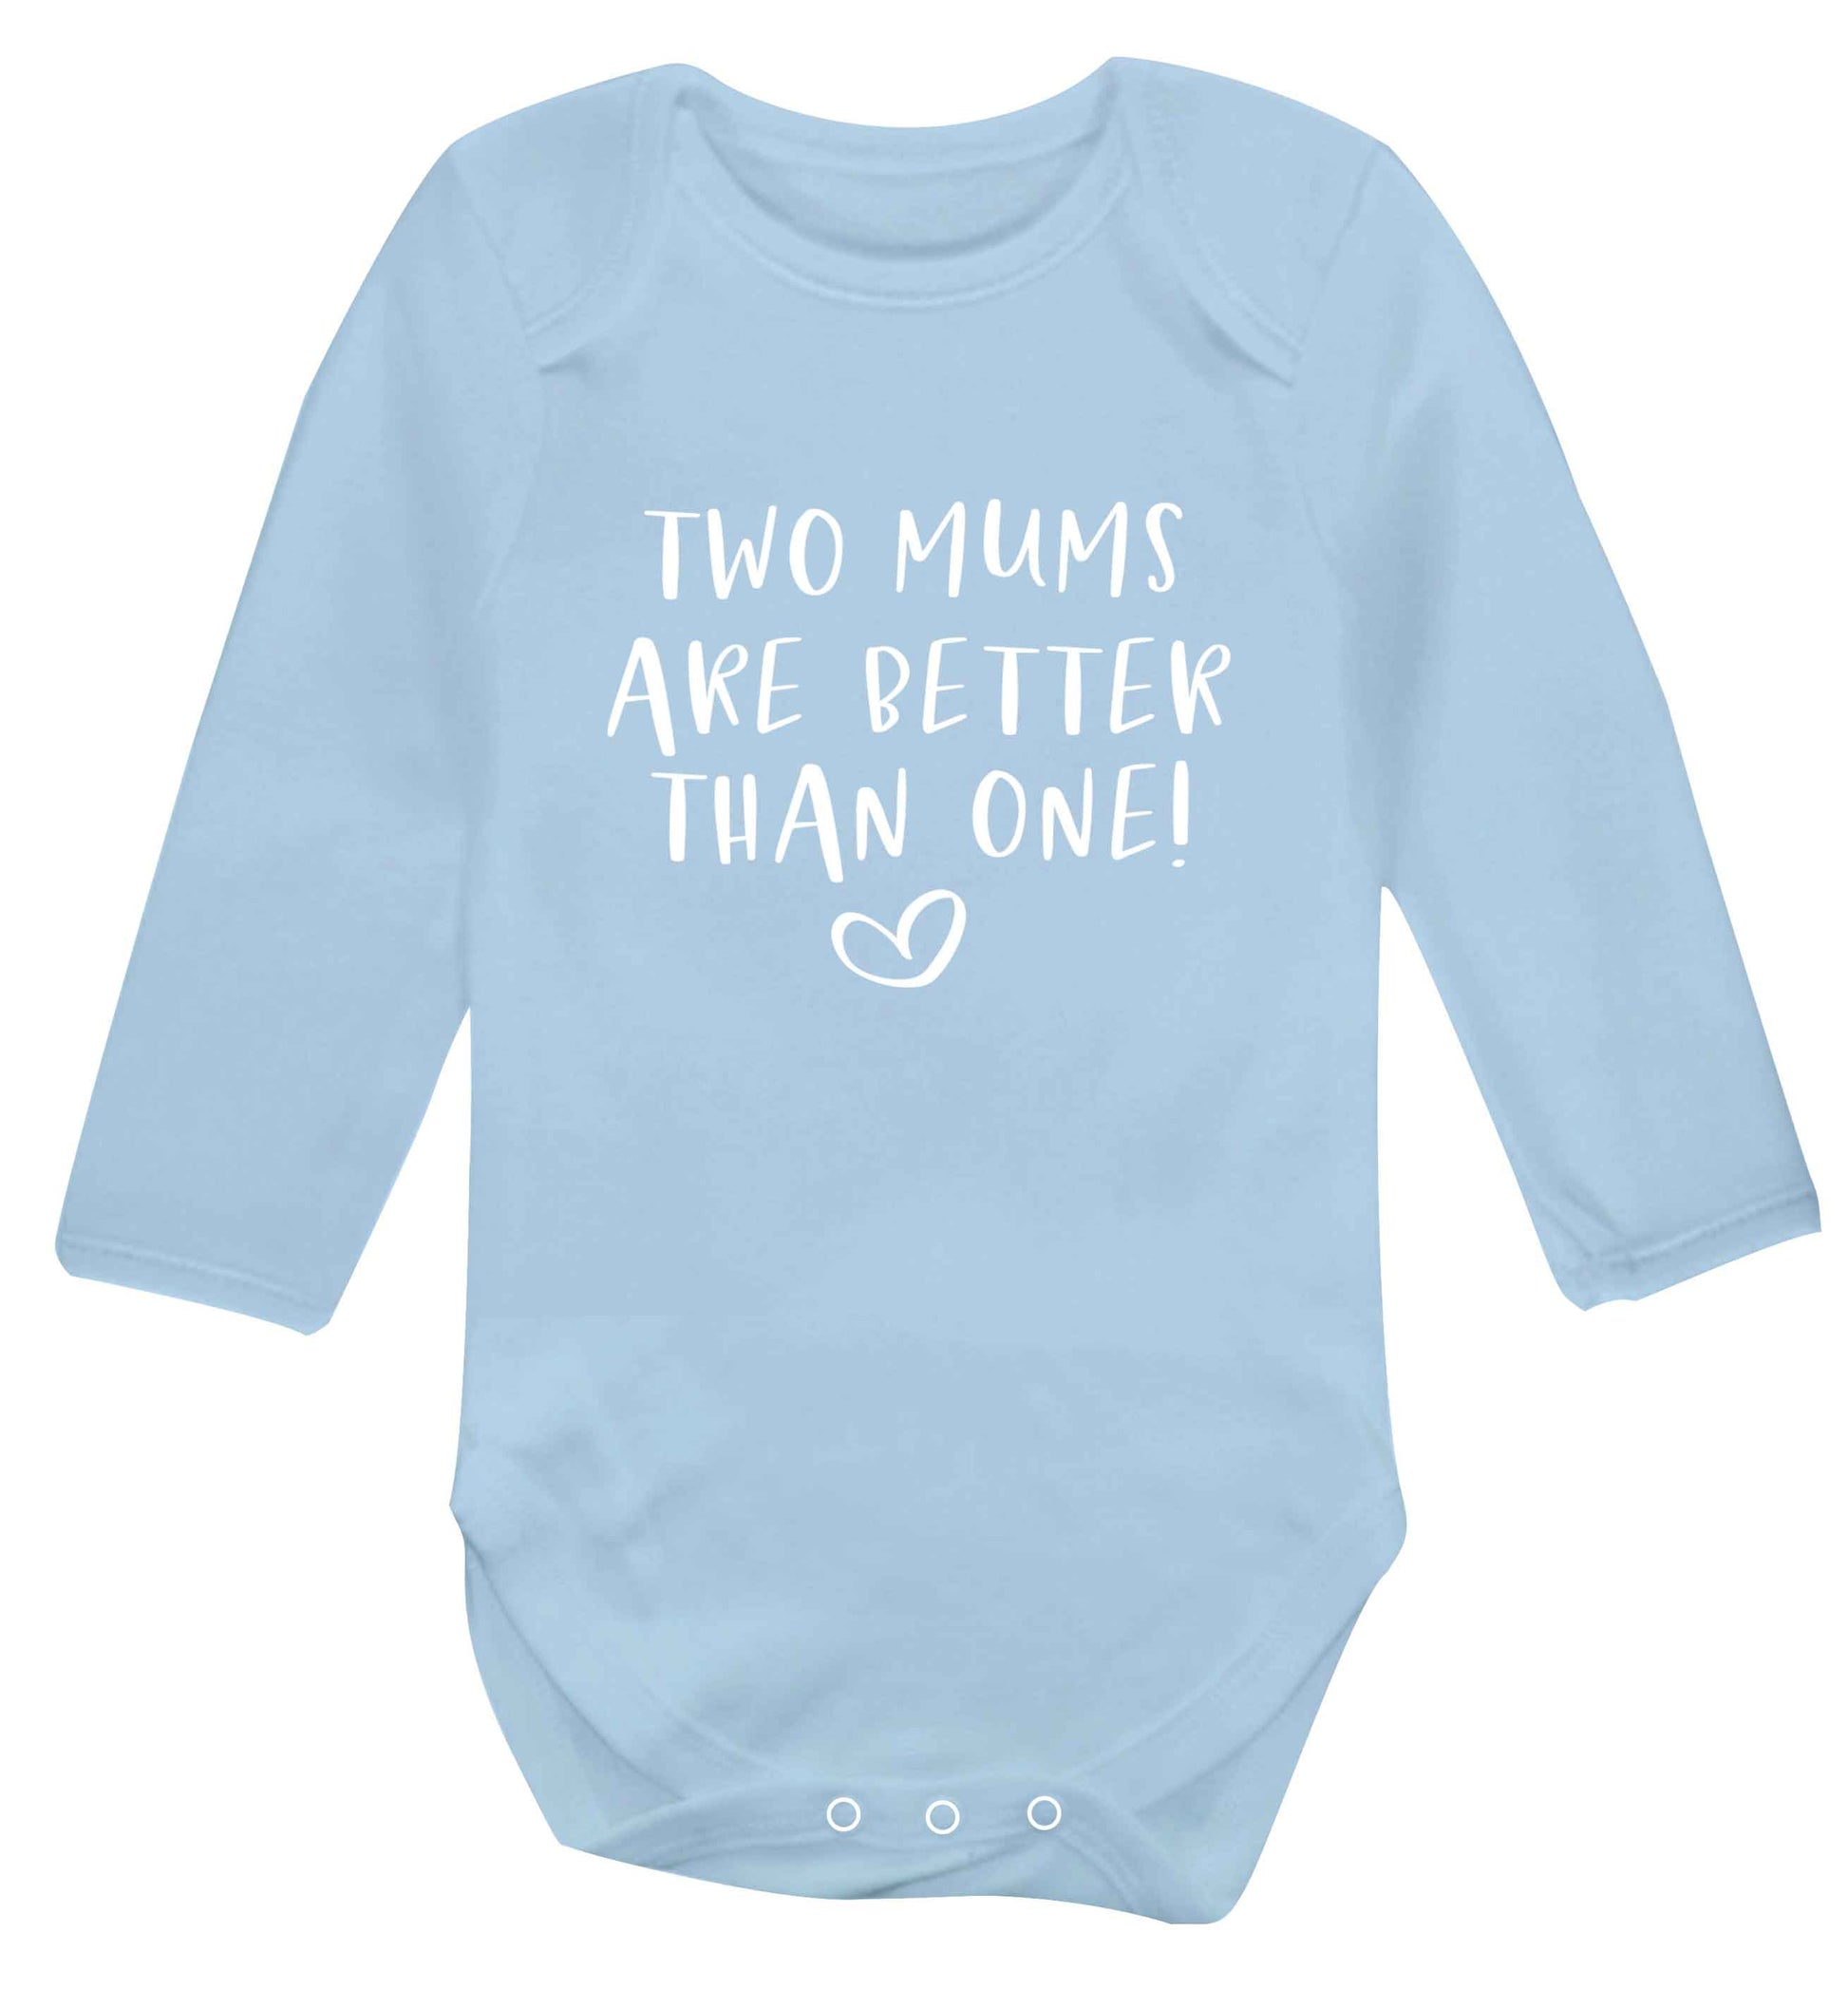 Two mums are better than one baby vest long sleeved pale blue 6-12 months